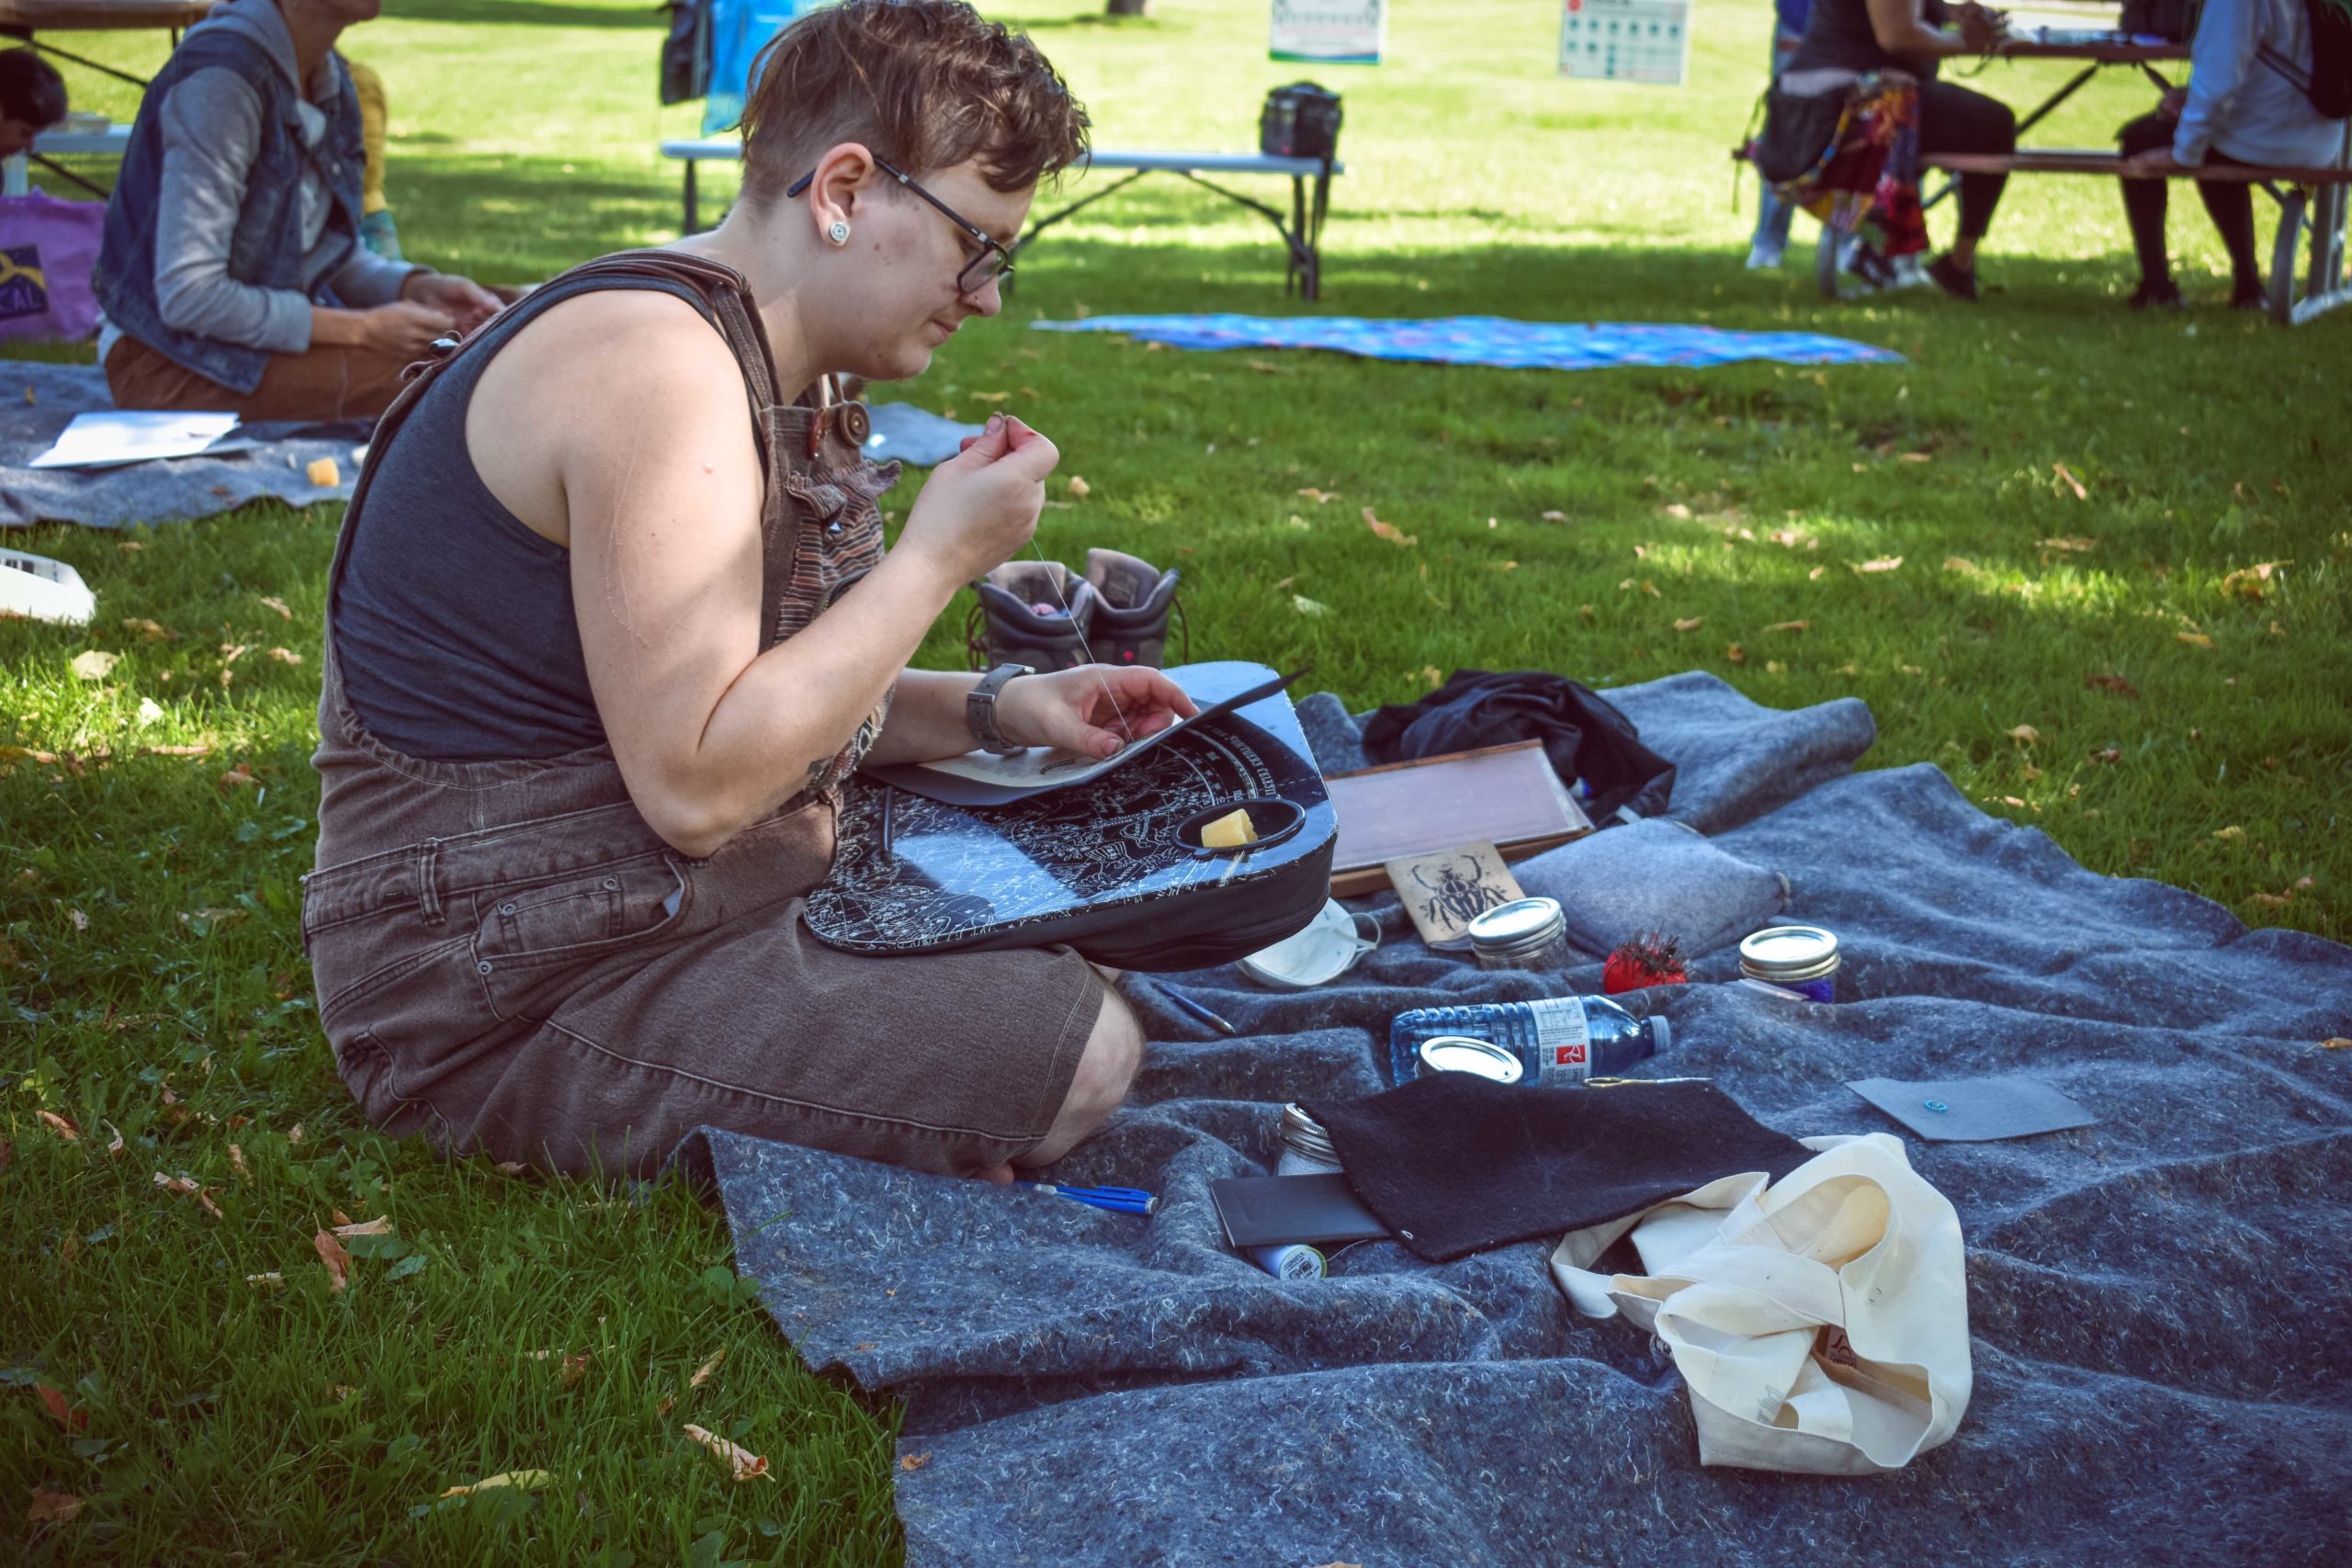 Photo of a person sitting on a grey blanket on the grass, working on their beaded artwork. There are items scattered around them, and other participants in the background sitting at picnic tables or blankets.